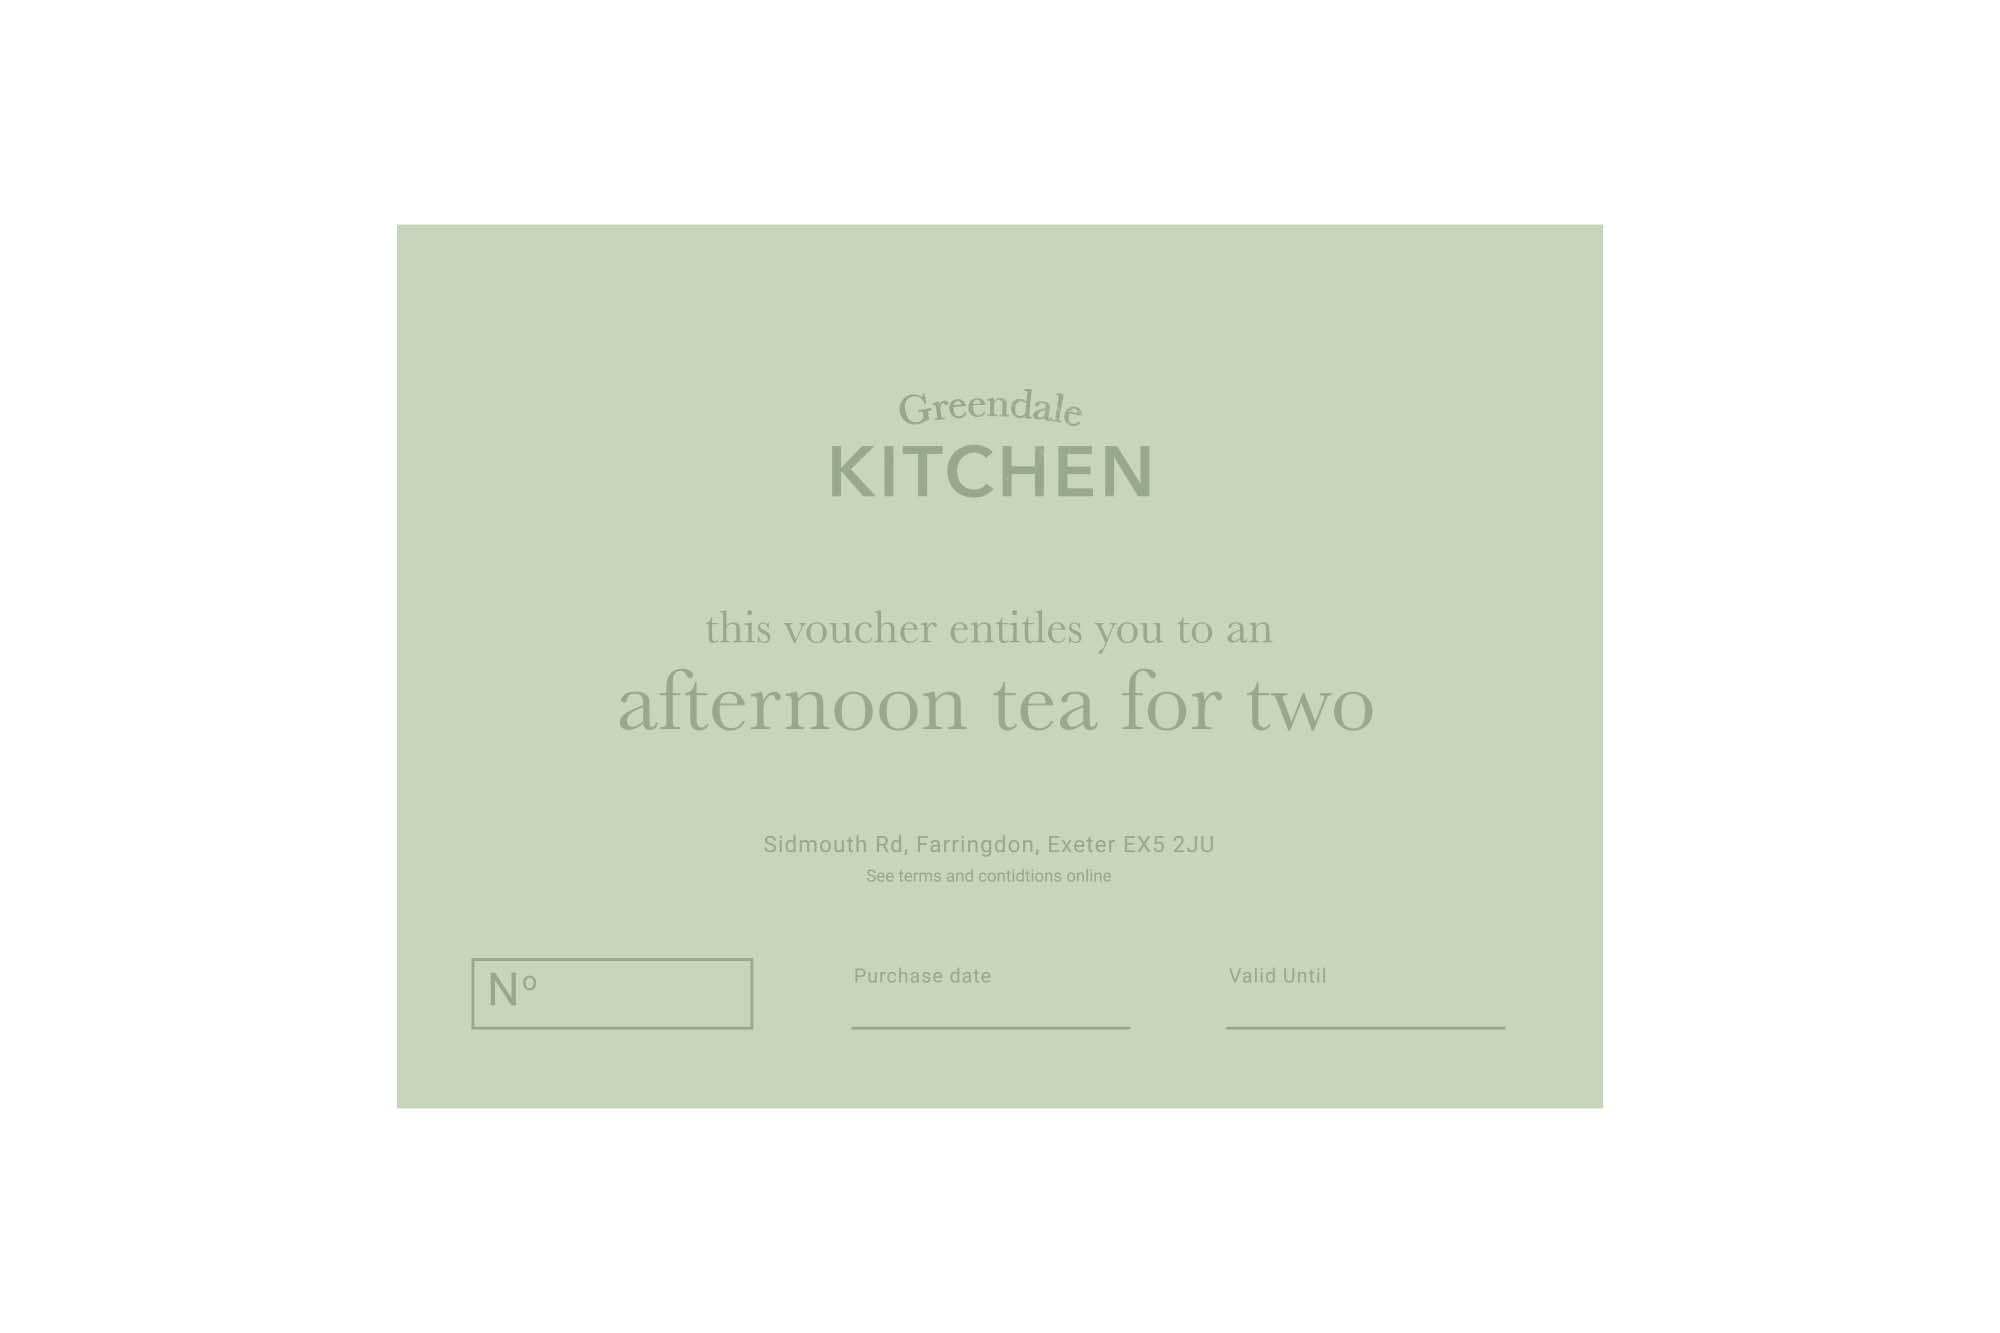 Greendale Kitchen Afternoon Tea for Two Voucher